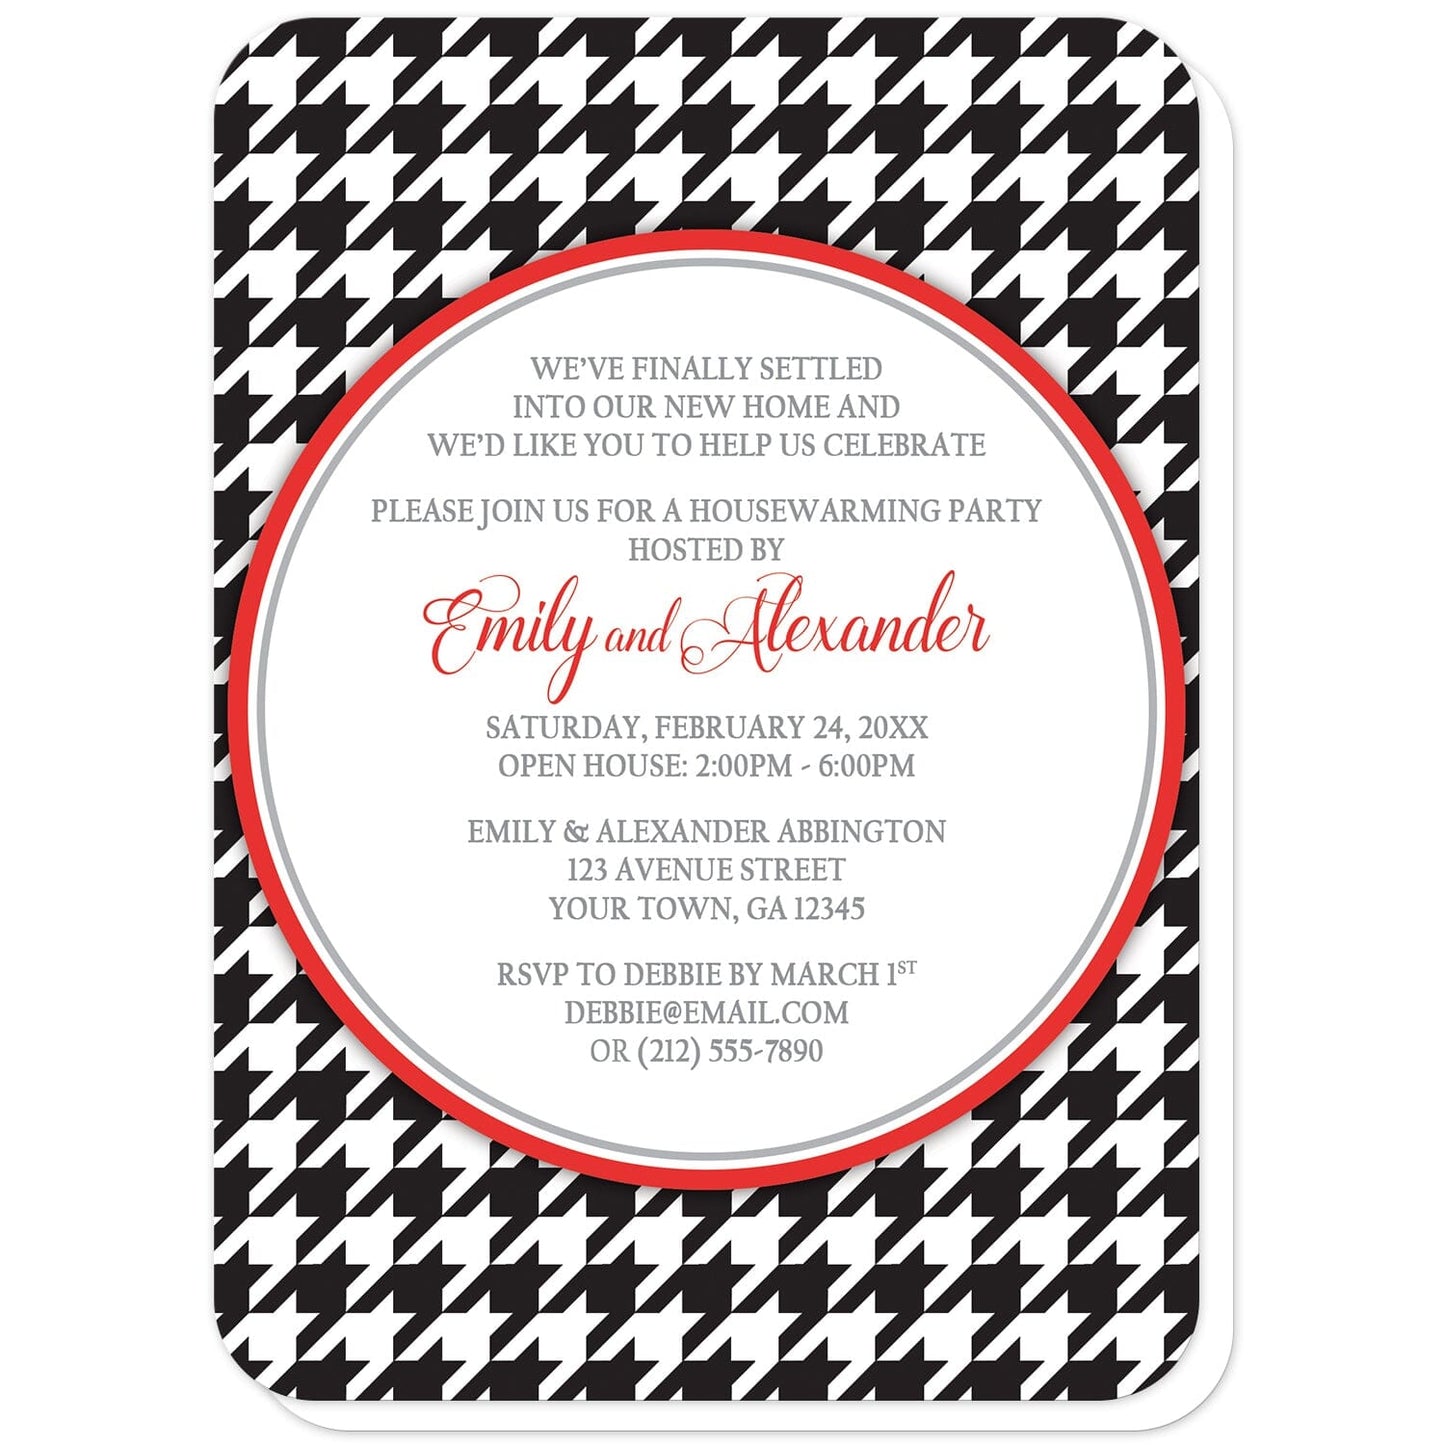 Stylish Black Houndstooth Red Housewarming Invitations (with rounded corners) at Artistically Invited. Stylish black houndstooth red housewarming invitations with your personalized celebration details custom printed in red and gray inside a white circle over a black and white houndstooth pattern. 